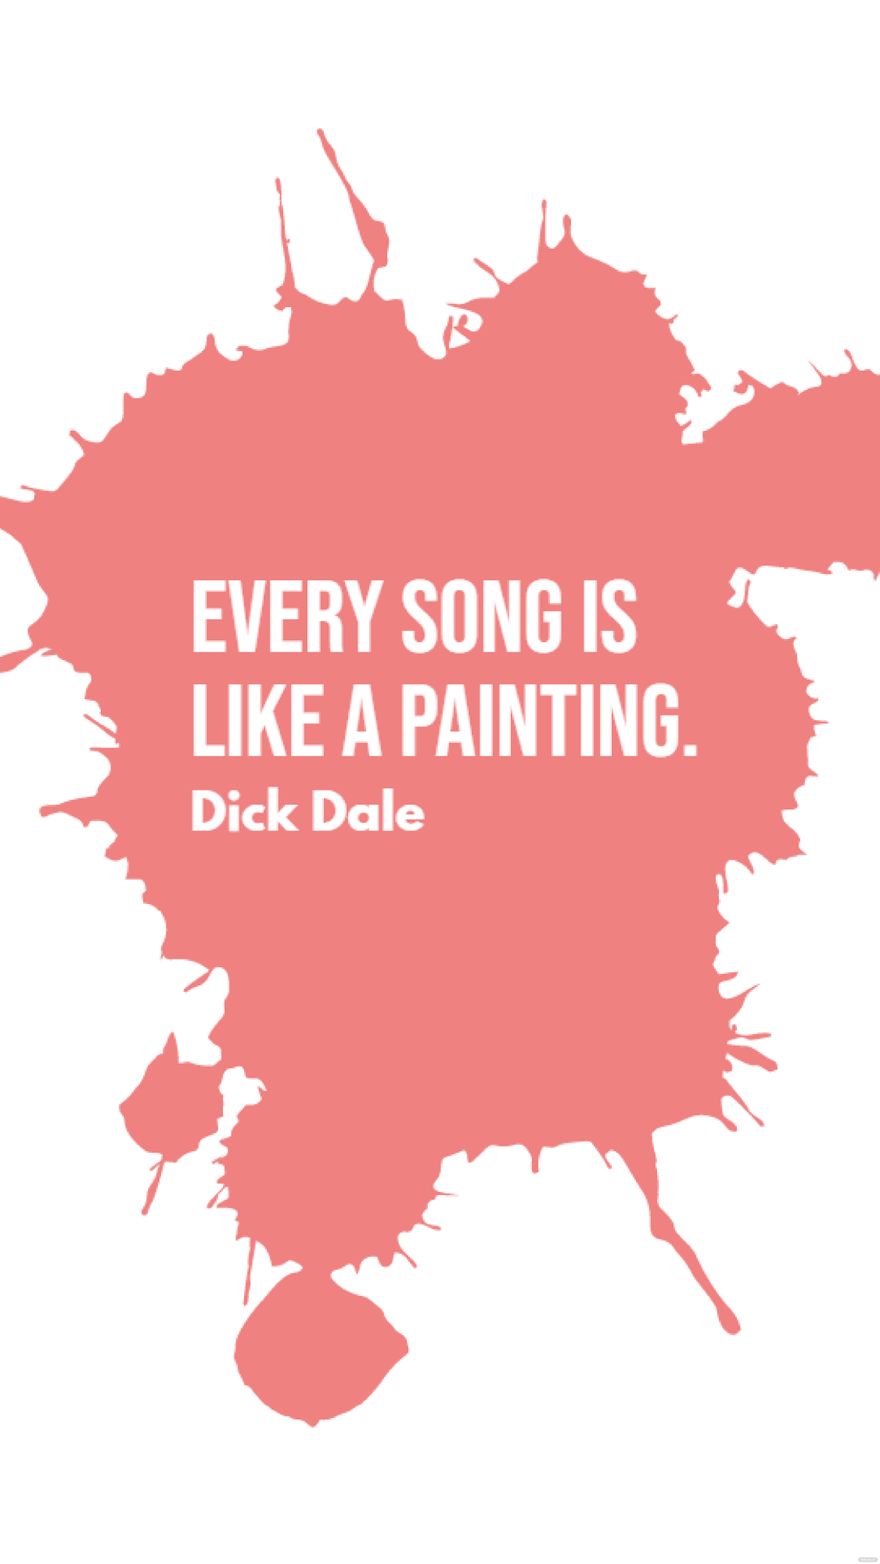 Dick Dale - Every song is like a painting.